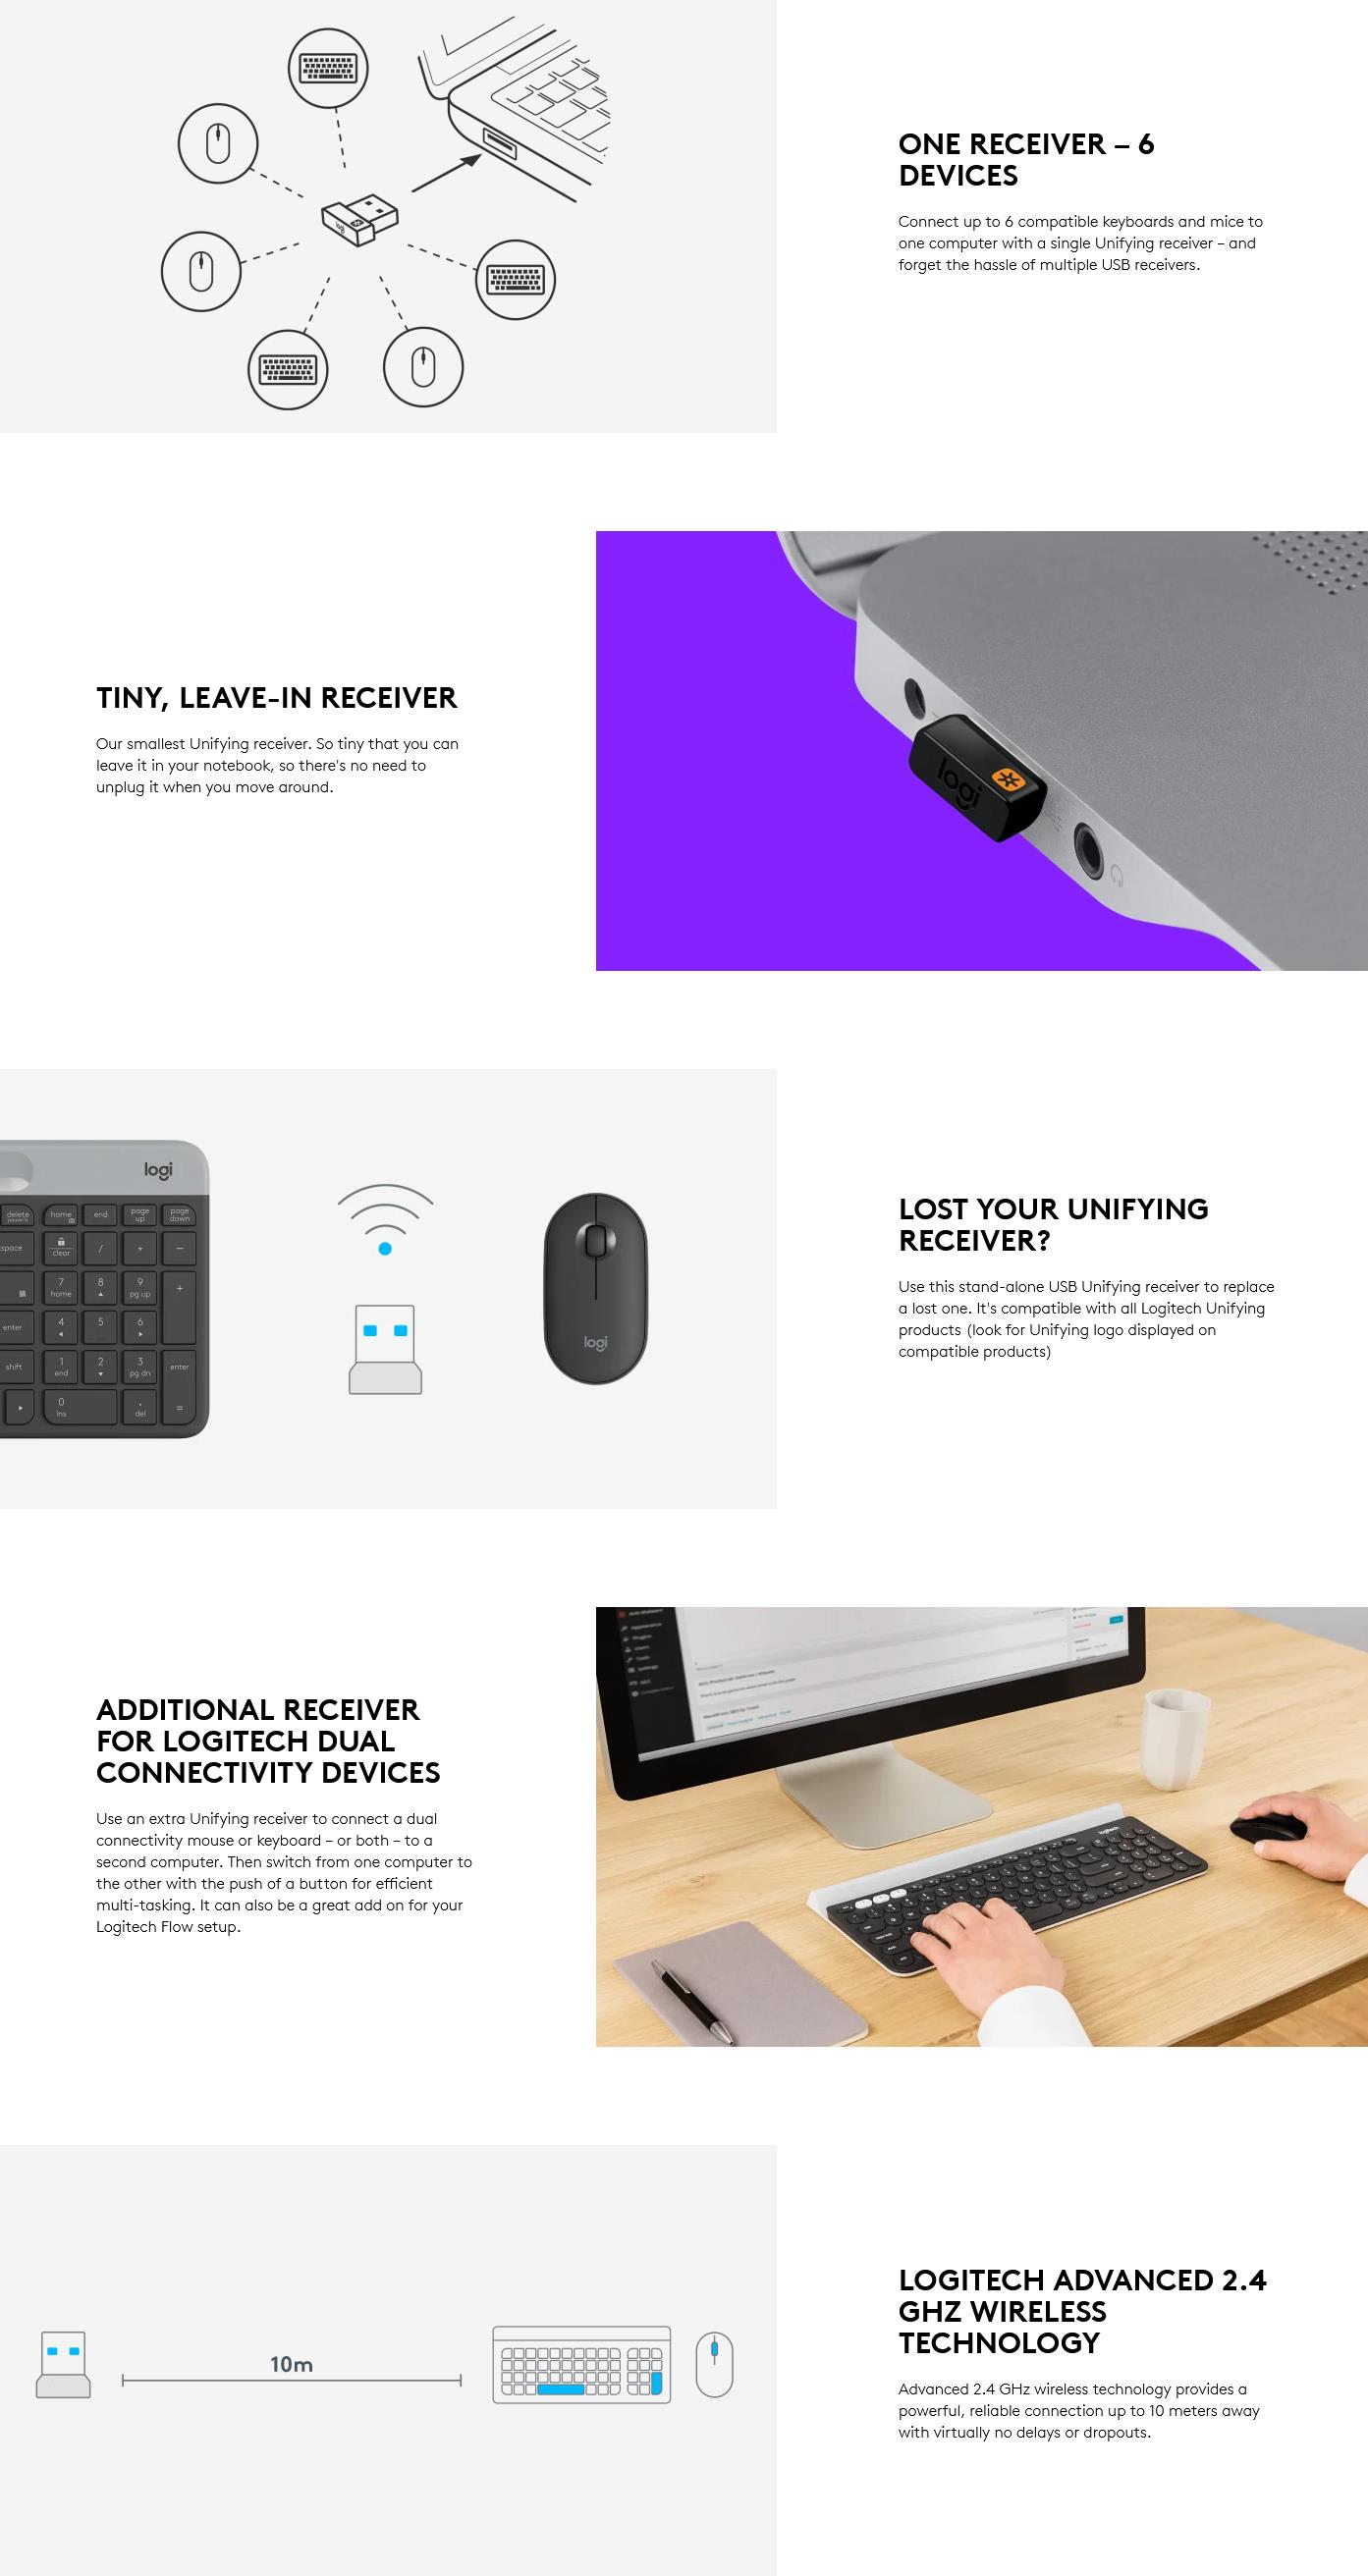 A large marketing image providing additional information about the product Logitech USB Unifying Receiver - Additional alt info not provided